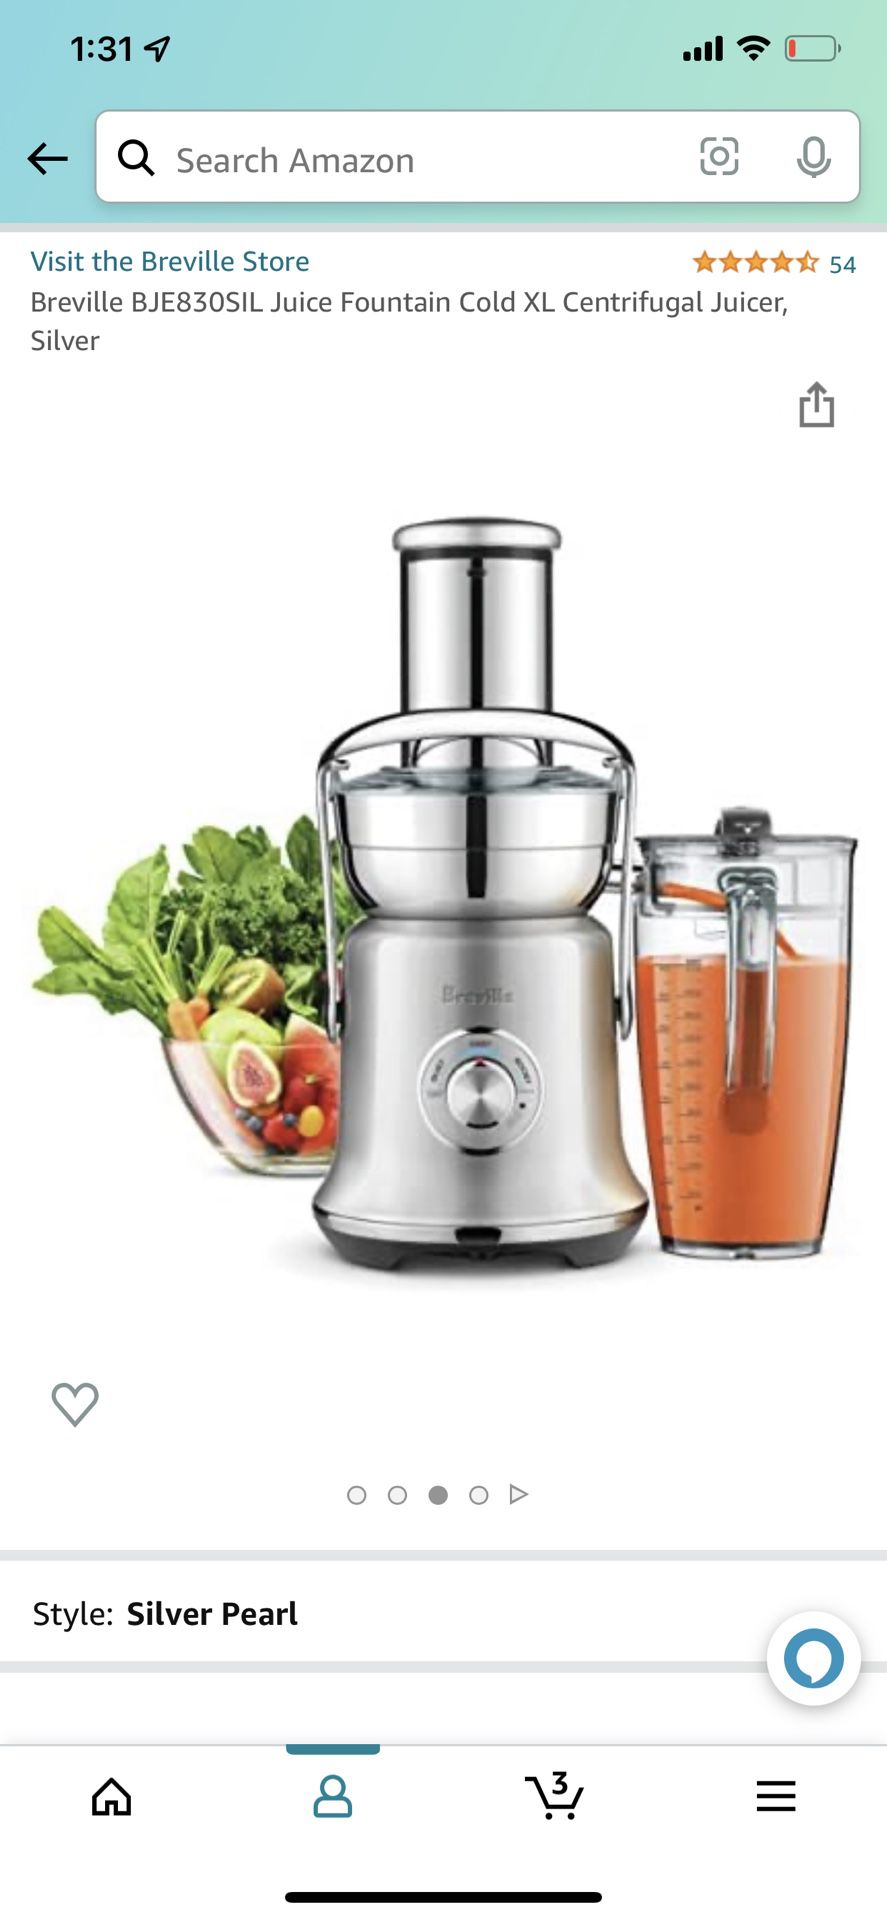 Breville BJE830SIL Juice Fountain Cold XL Centrifugal Juicer, Silver